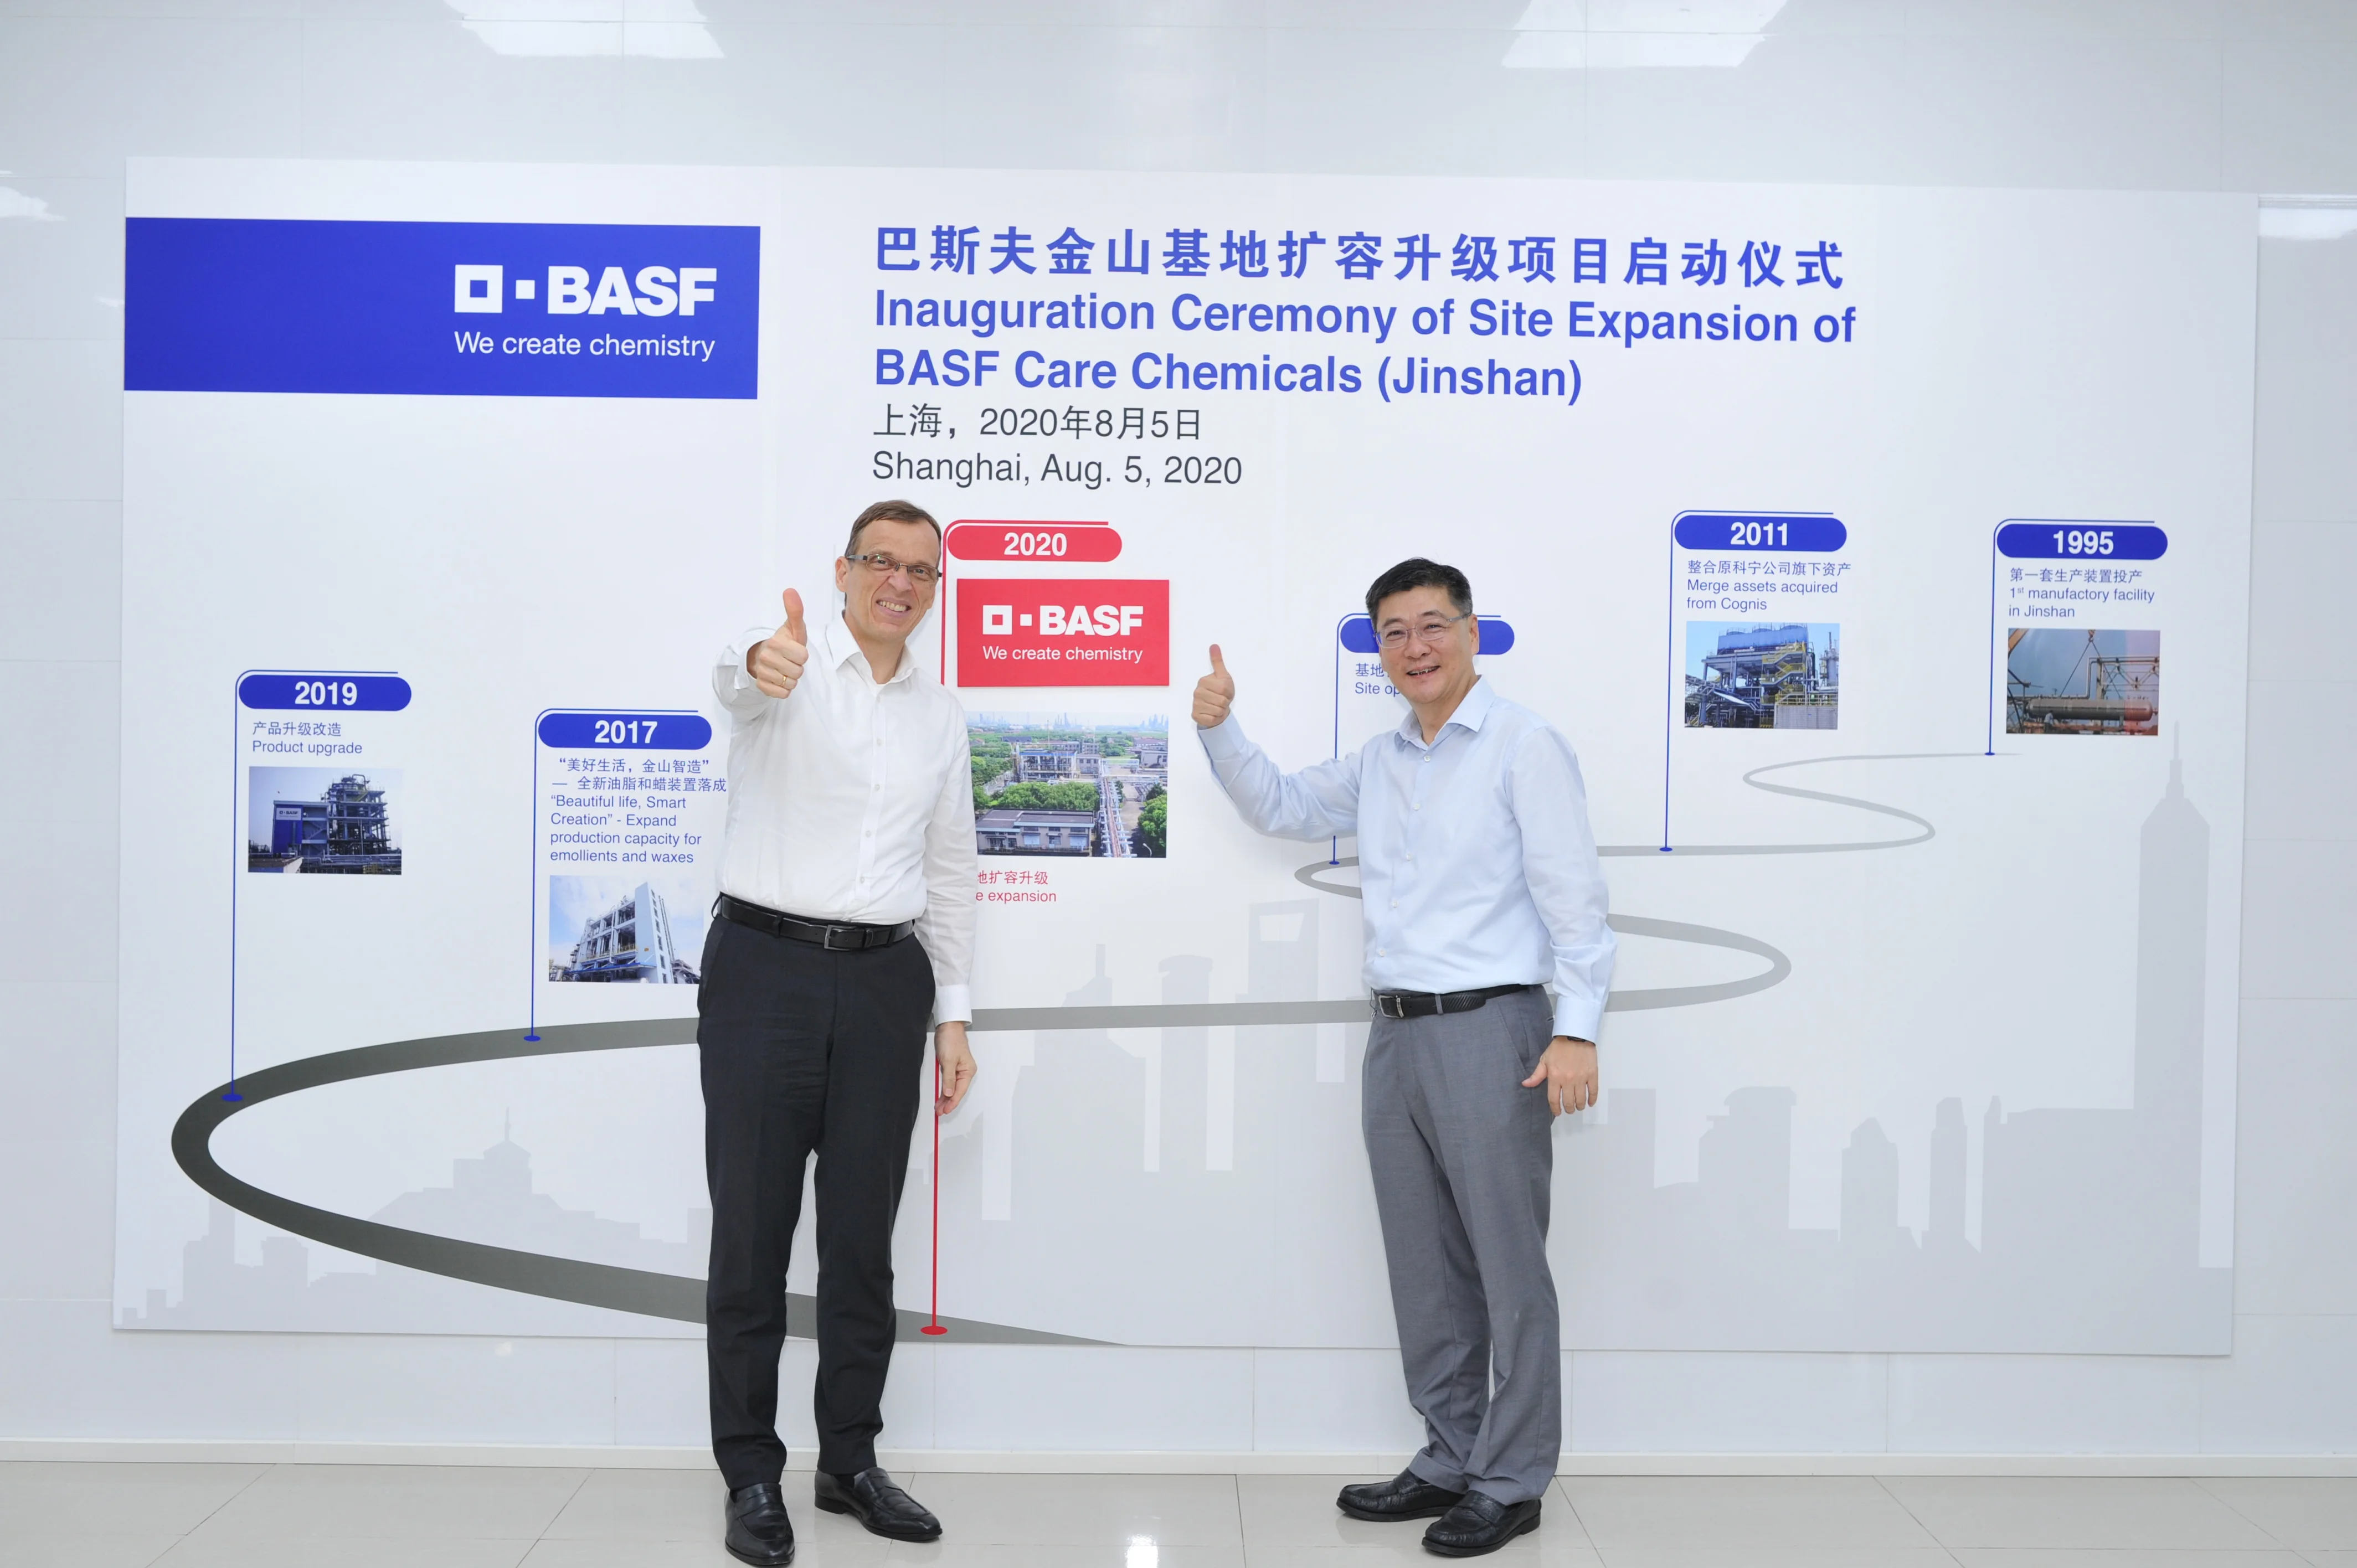 BASF to acquire Sinopec’s alkoxylate production assets in Asia Pacific